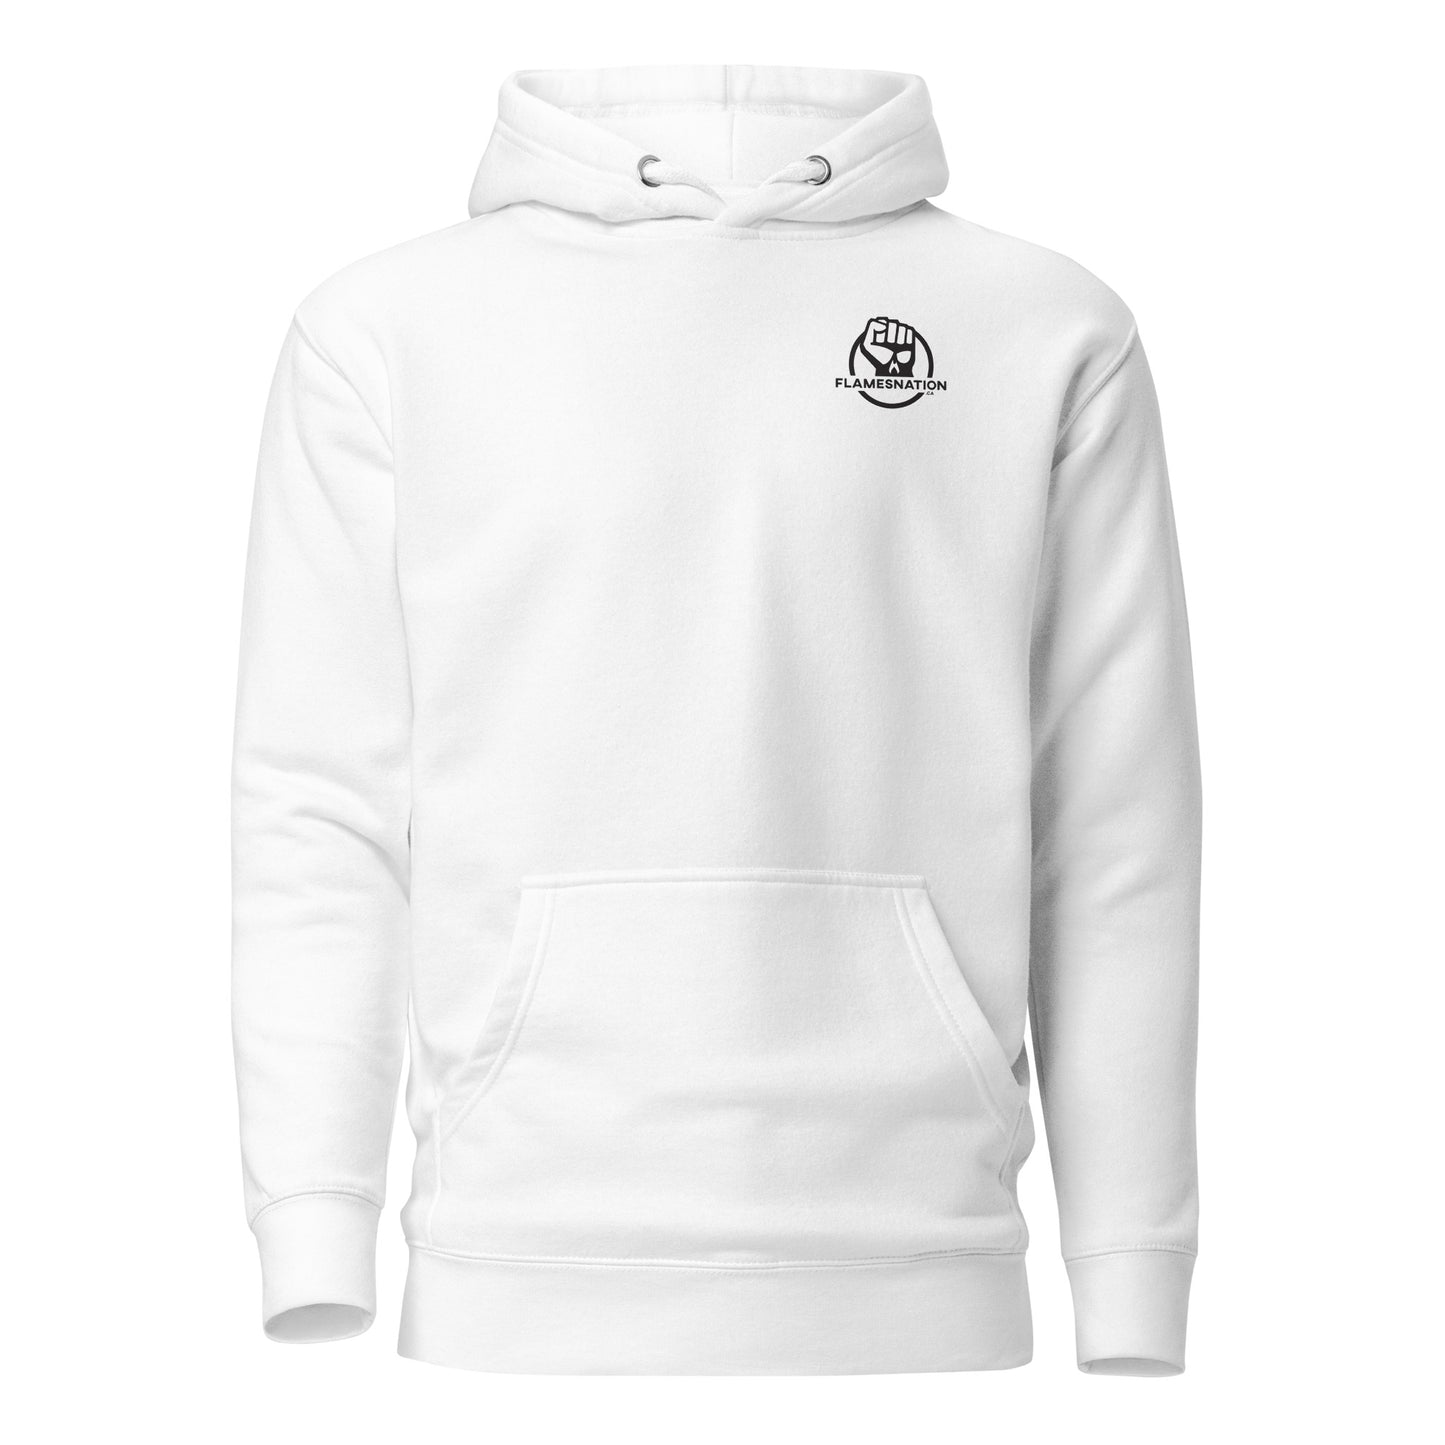 THE CLASSICS - Flamesnation Left Chest Hoodie